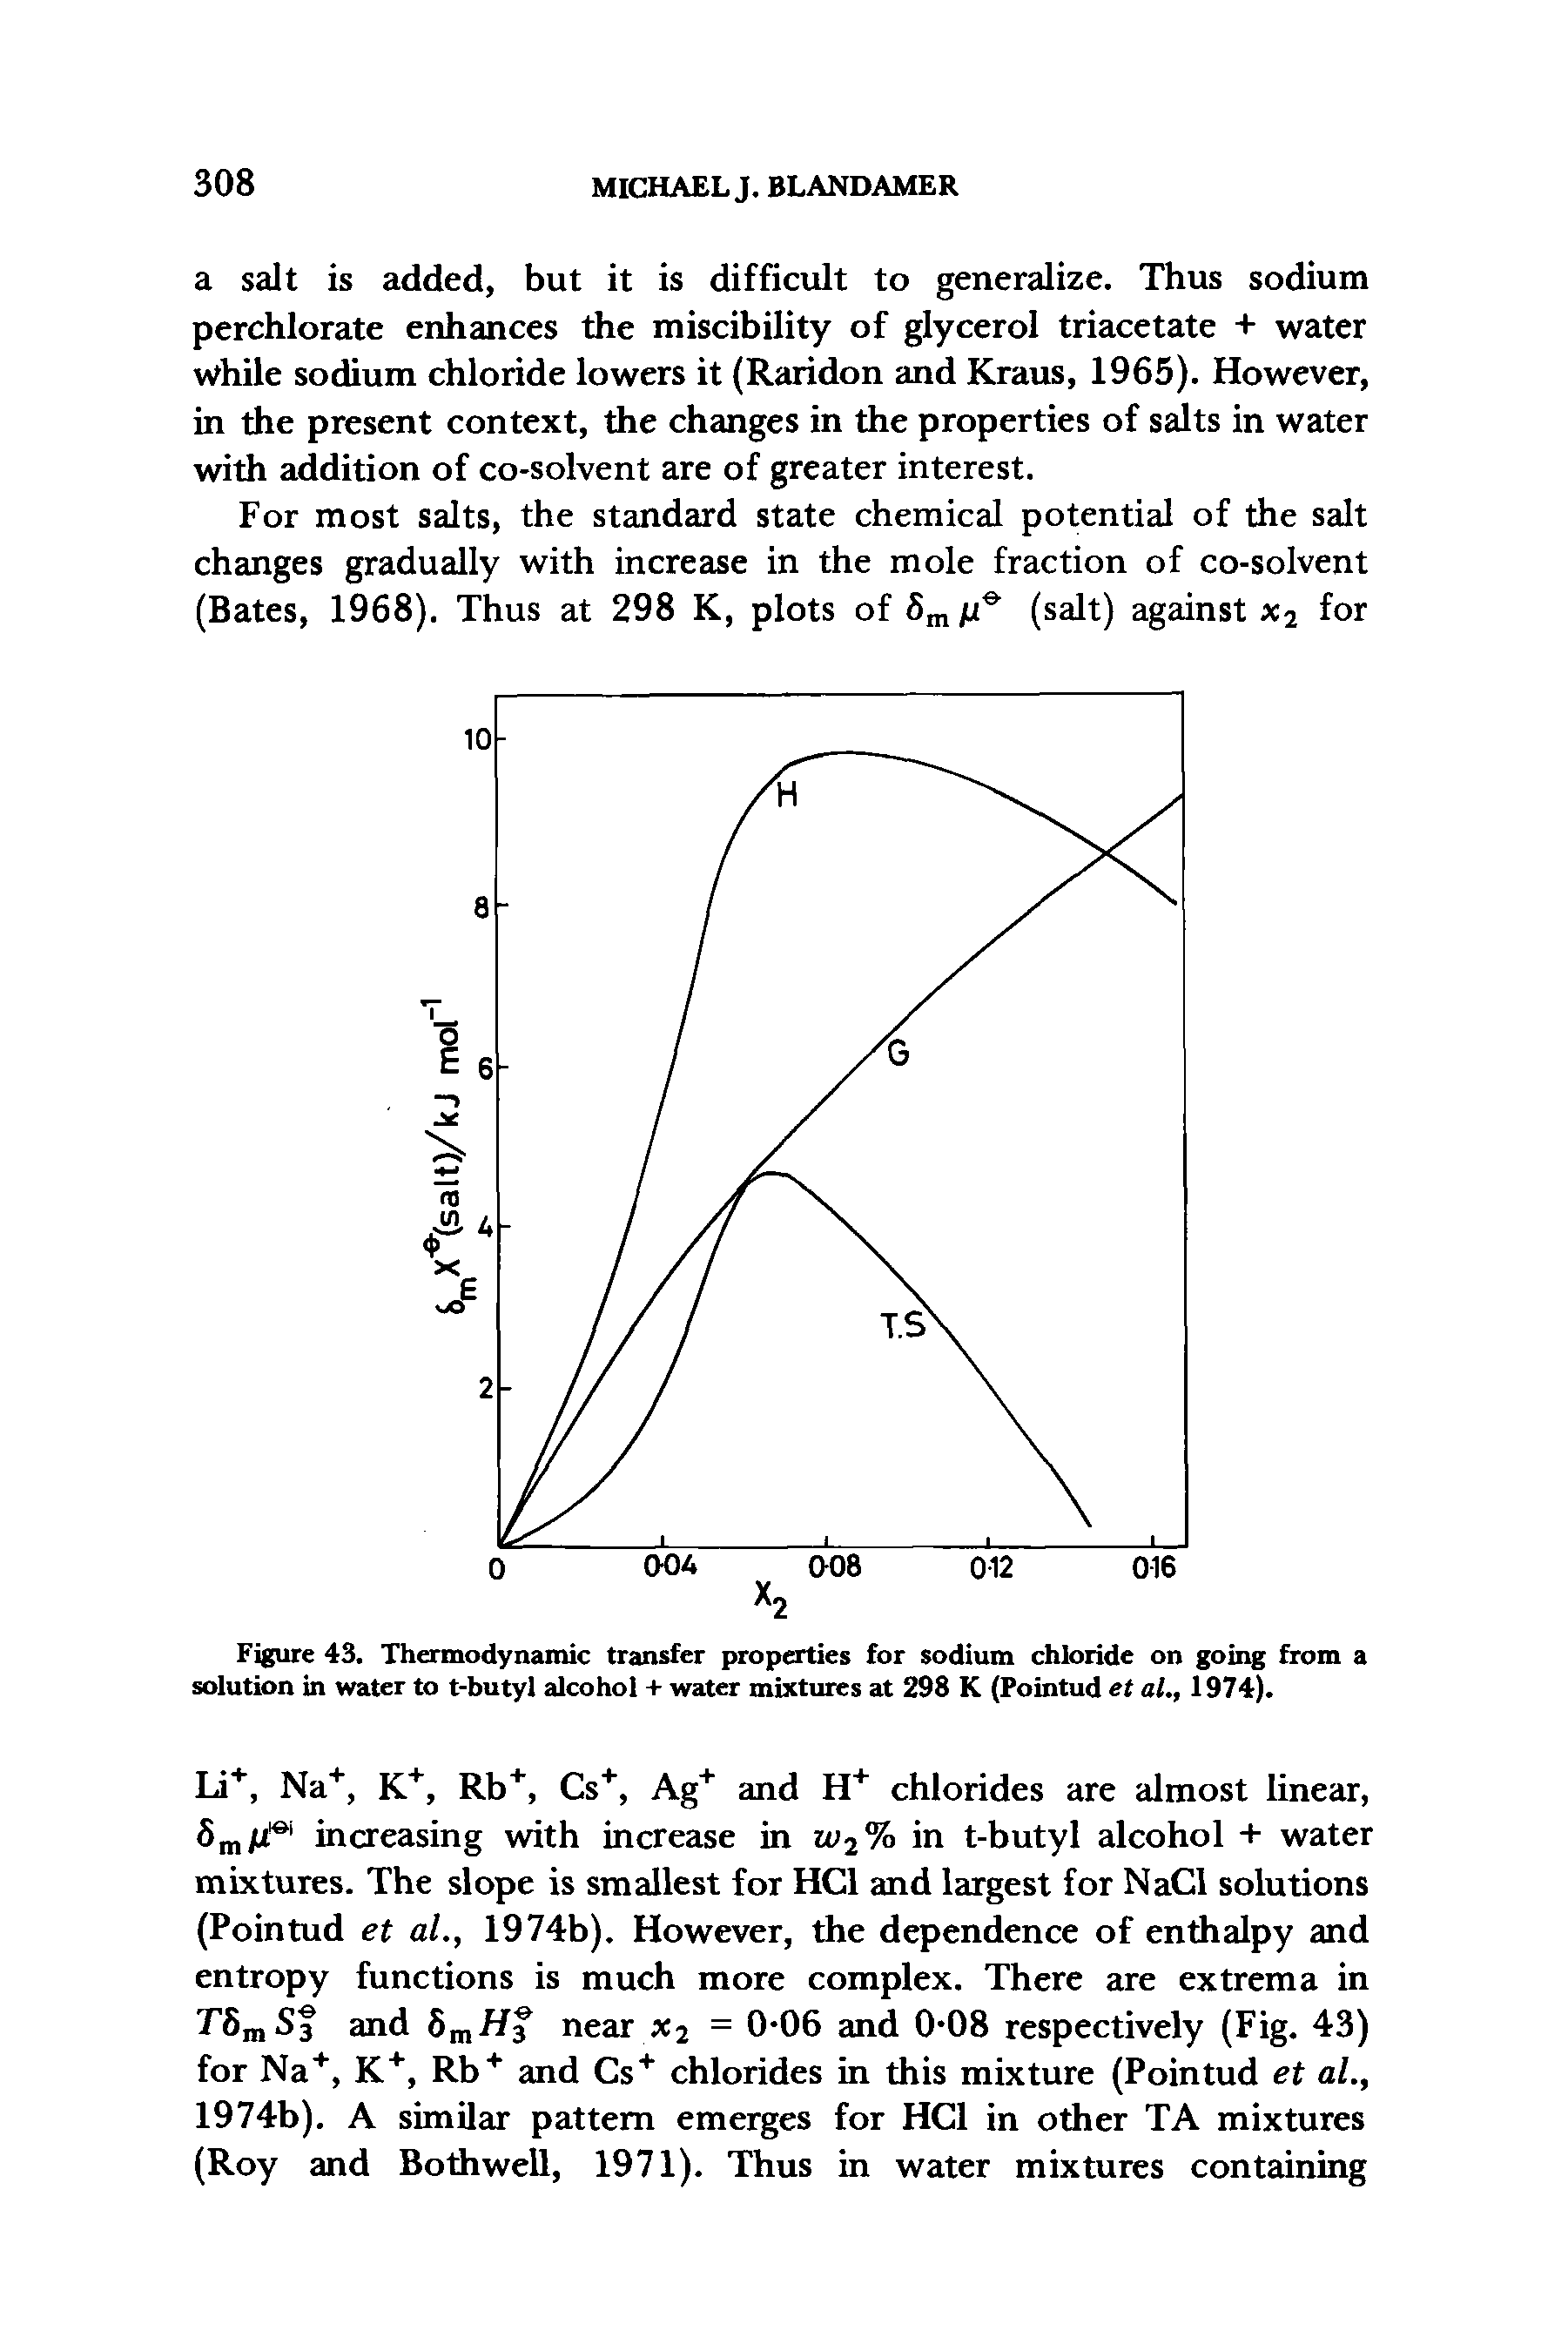 Figure 43. Thermodynamic transfer properties for sodium chloride on going from a solution in water to t-butyl alcohol + water mixtures at 298 K (Pointud et al., 1974).